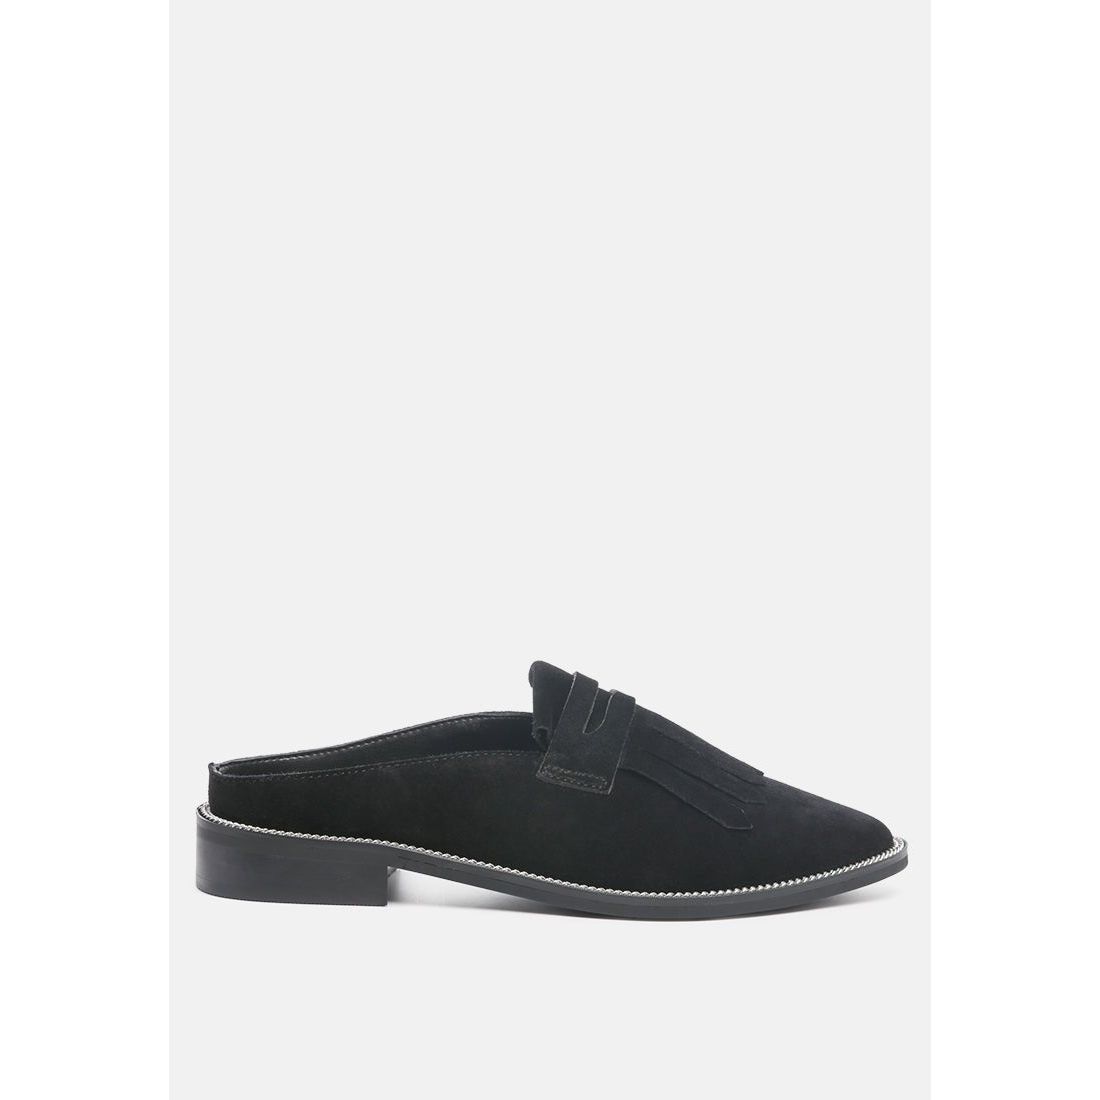 Lena Suede Walking Loafer Mules For Women - KME means the very best